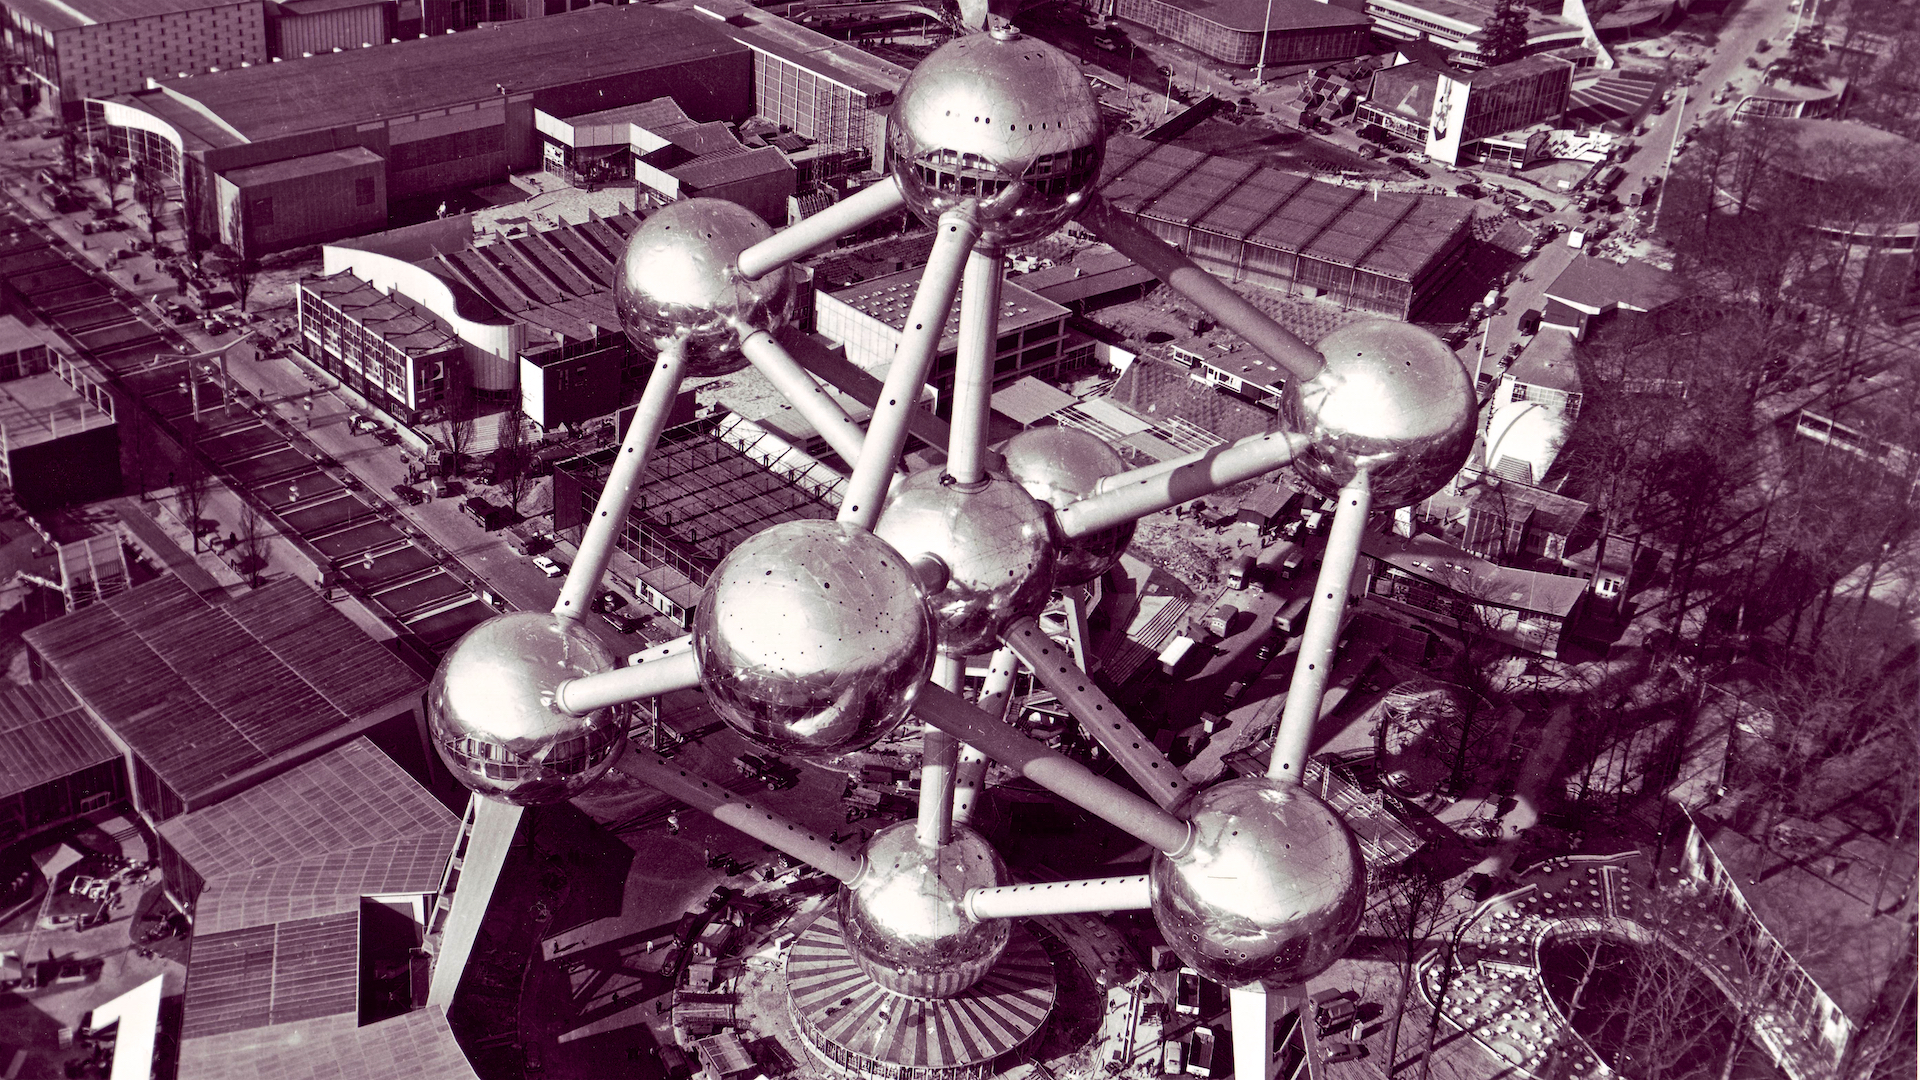 <p><span><span><span><span><span><span>The Atomium, in Brussels, Belgium, was designed by engineer André Waterkeyn and architects André and Jean Polak. Built for the 1958 Brussels World's Fair (Expo 58), the Atomium represented scientific progress, technological innovation, and the peaceful use of nuclear energy.</span></span></span></span></span></span></p>  <p><span><span><span><span><span><span>The Atomium featured nine interconnected spheres, each measuring 18 meters in diameter. The spheres were supposed to represent an iron crystal magnified 165 billion times. During Expo 58, the Atomium was a central attraction, offering visitors an immersive and educational experience. Its interior offered exhibitions on science, industry, and culture while its observation decks provided panoramic views of Brussels and the surrounding landscape.</span></span></span></span></span></span></p>  <p><span><span><span><span><span><span>Although the Atomium was originally intended as a temporary exhibit, the building still stands and continues to be a major tourist destination, attracting over half a million visitors annually. Visitors can see the exhibitions, including displays on the history of the Atomium and temporary art installations. The Atomium's observation decks are also popular, offering breathtaking views of Brussels.</span></span></span></span></span></span></p>